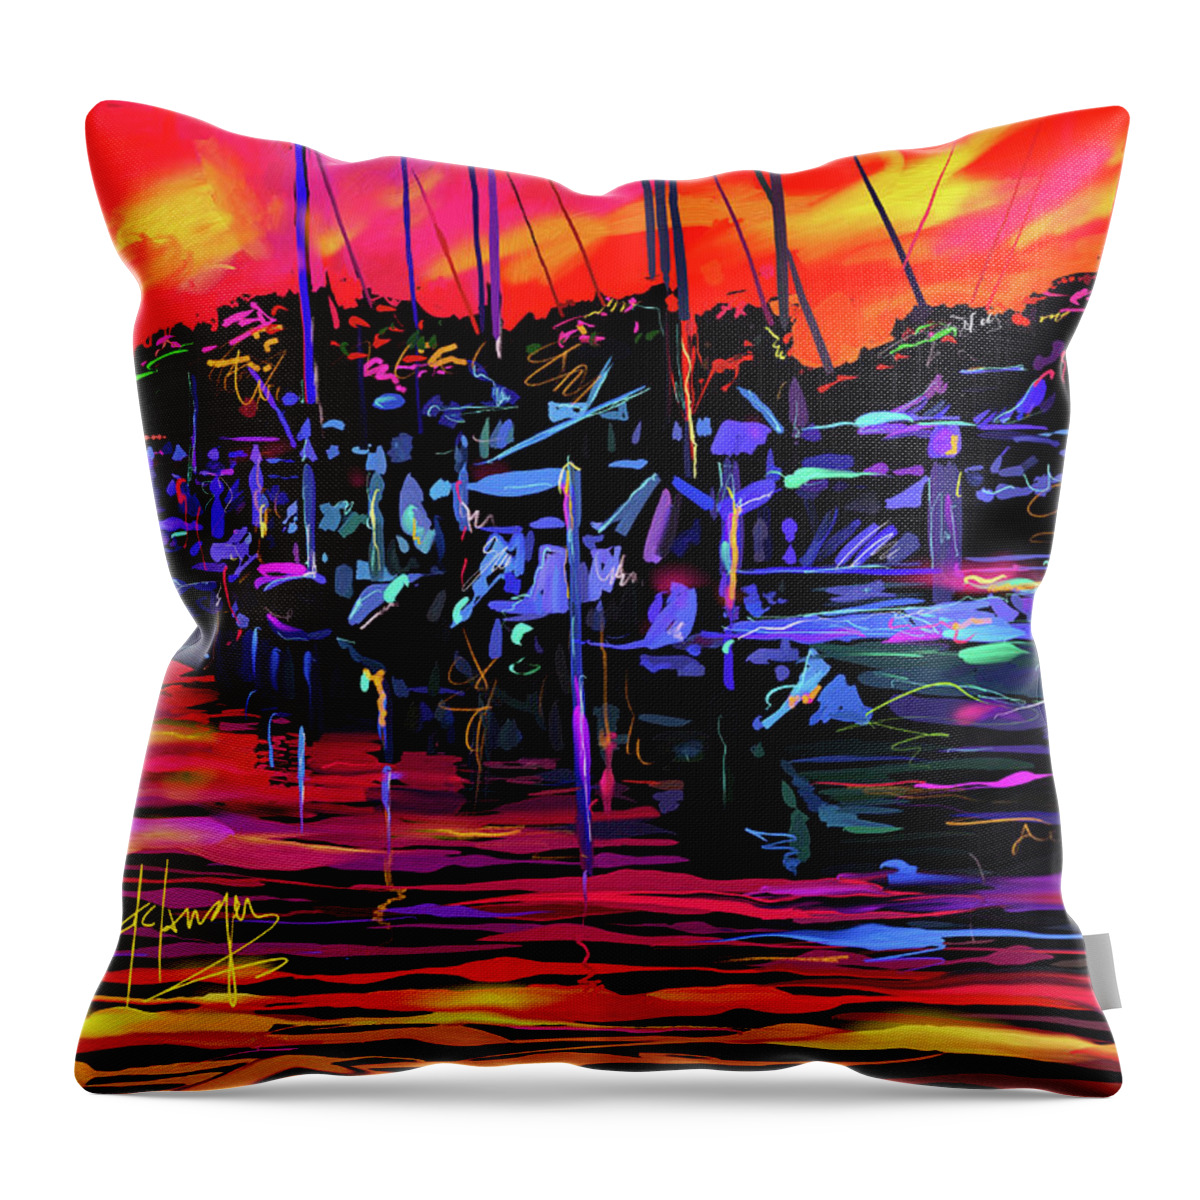 Boats In San Diego Harbor Throw Pillow featuring the painting Boats in San Diego Harbor by DC Langer